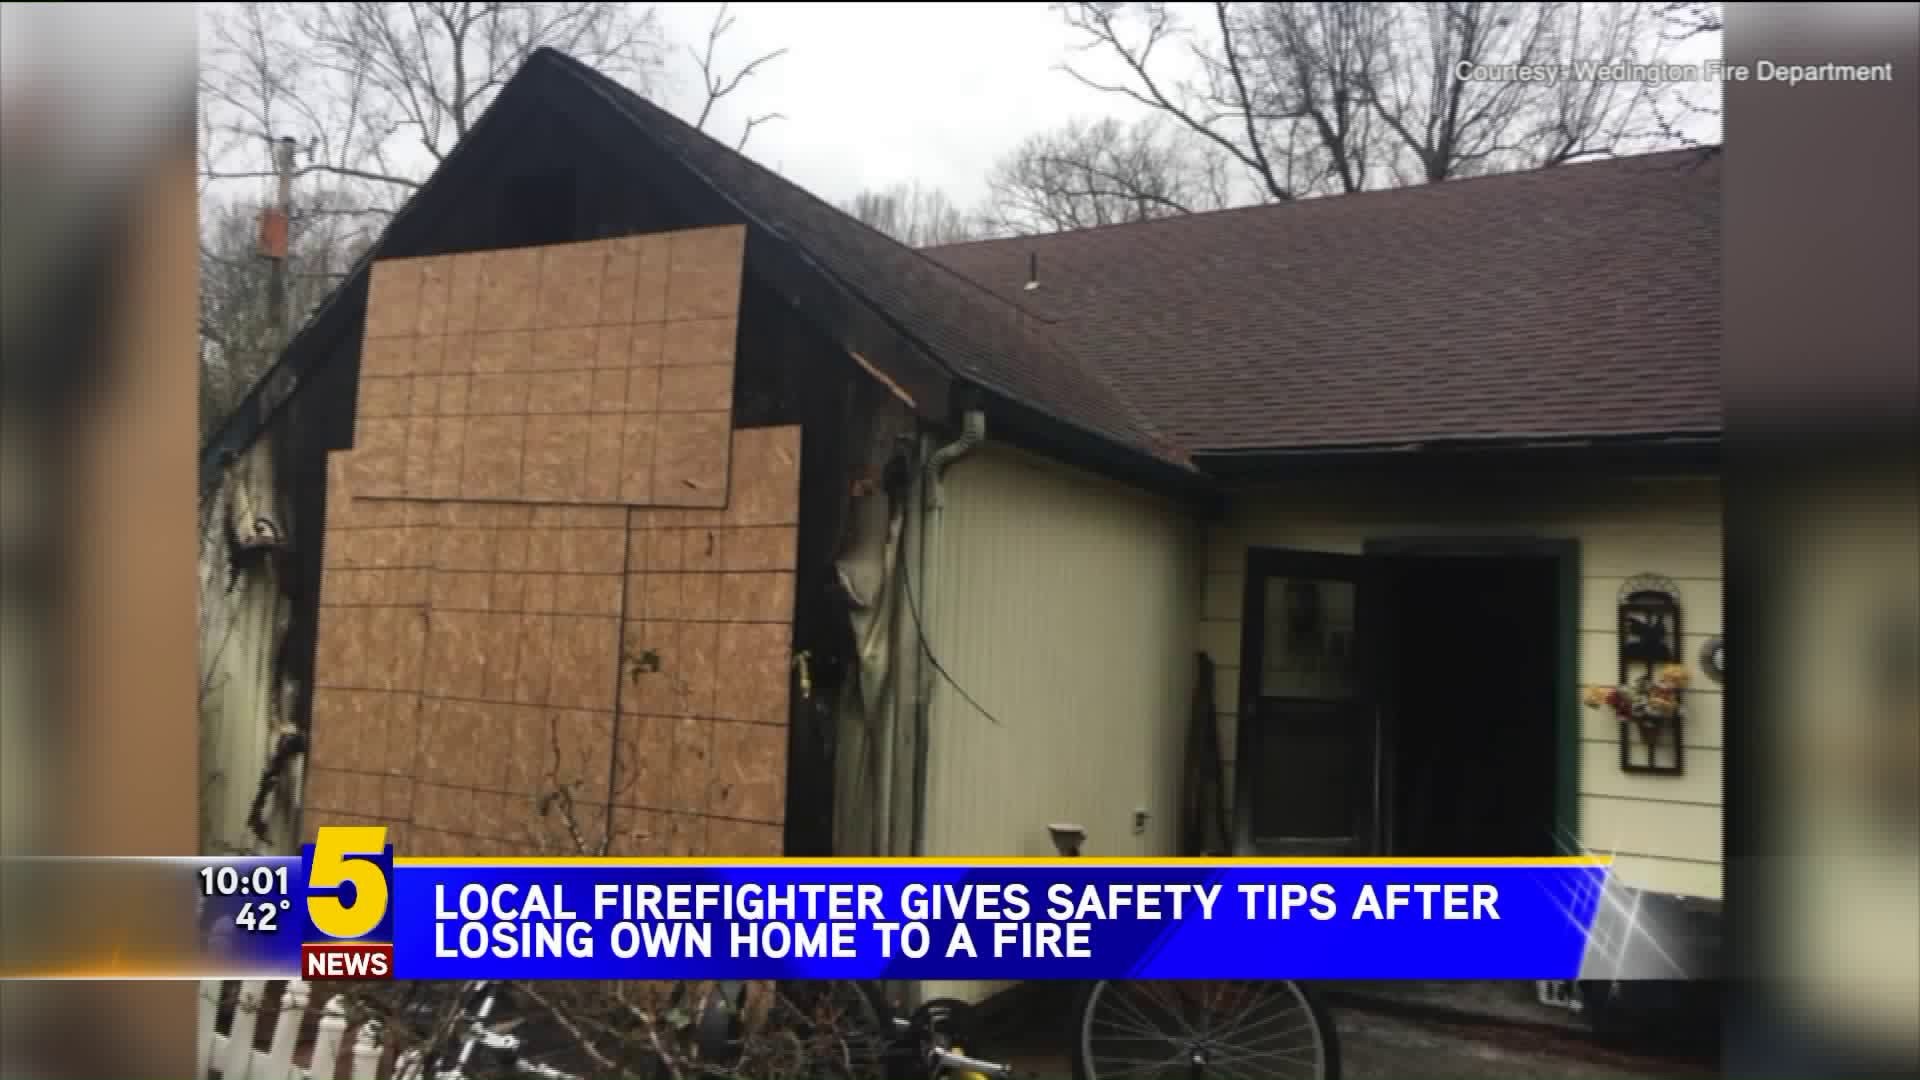 LOCAL FIREFIGHTER GIVES SAFETY TIPS AFTER LOSING OWN HOME TO A FIRE